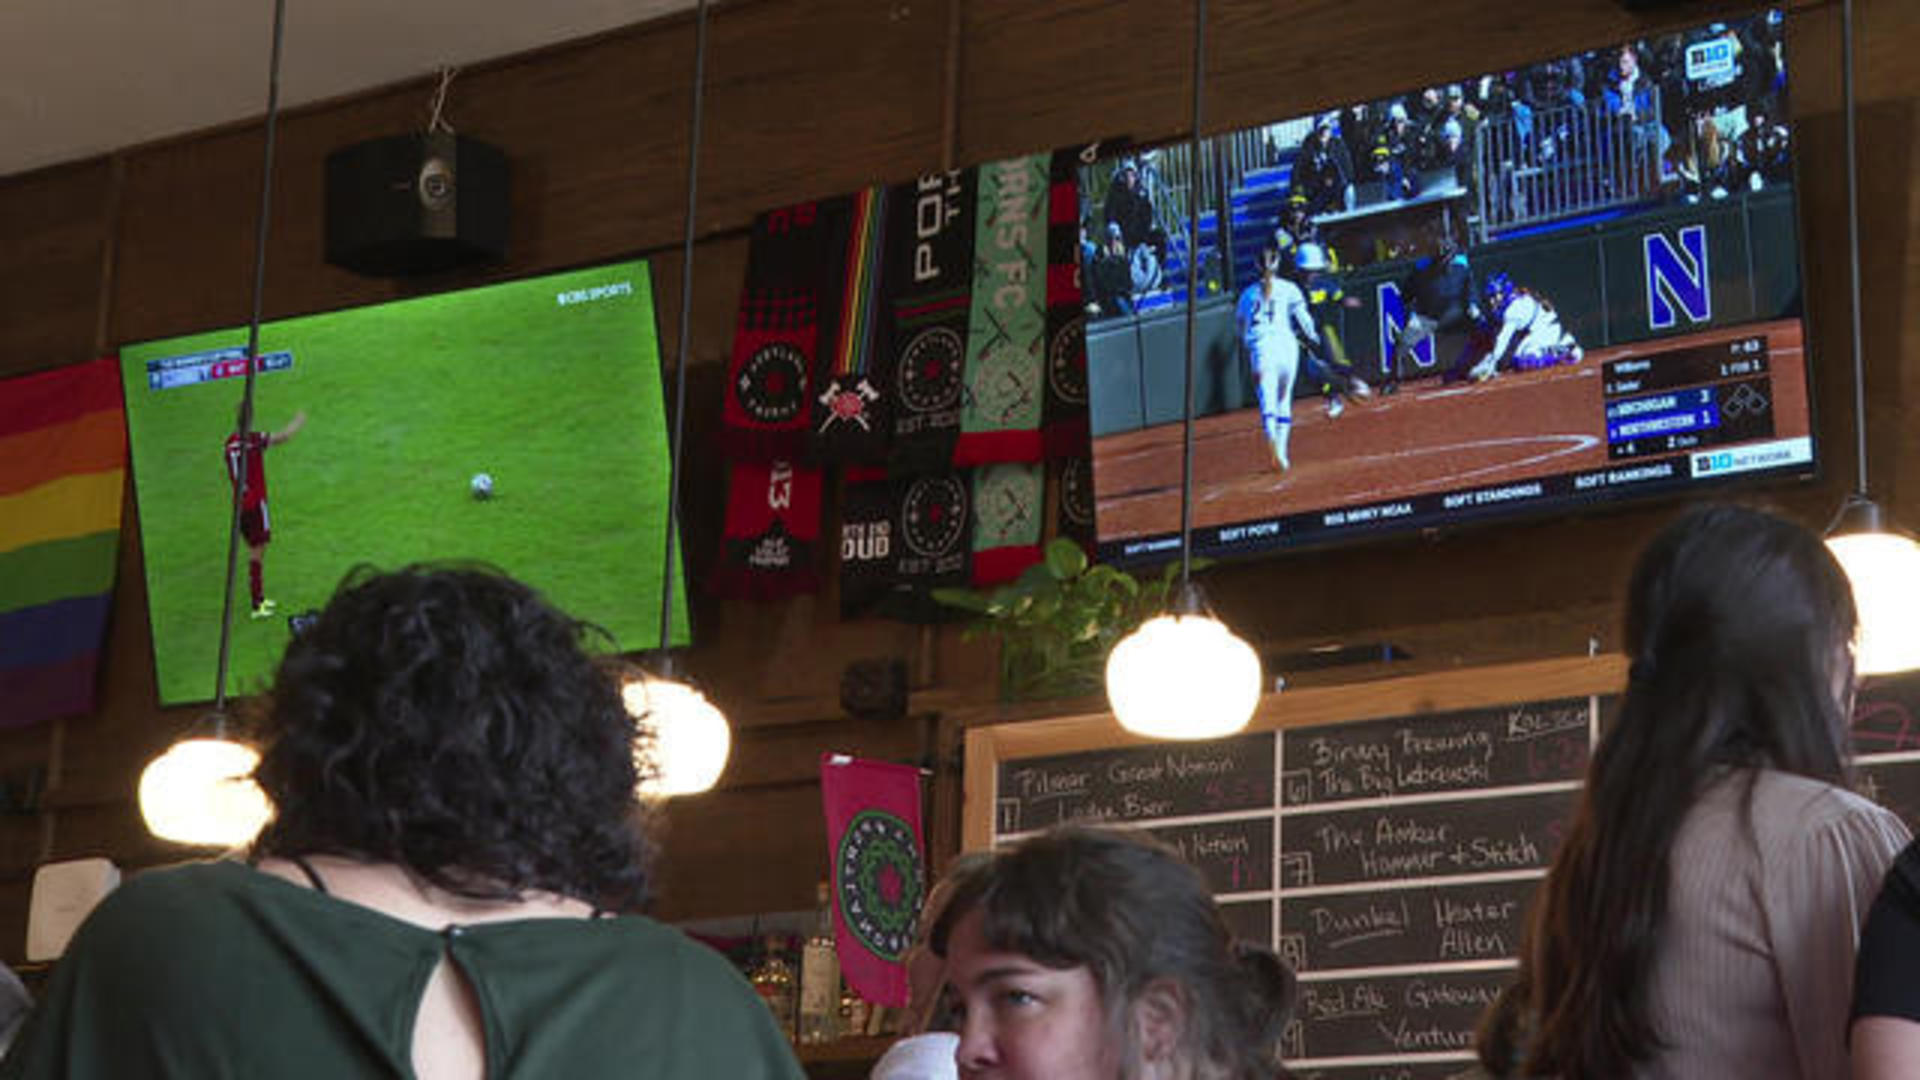 Sports Bra': This lesbian-owned bar plays only women's sports